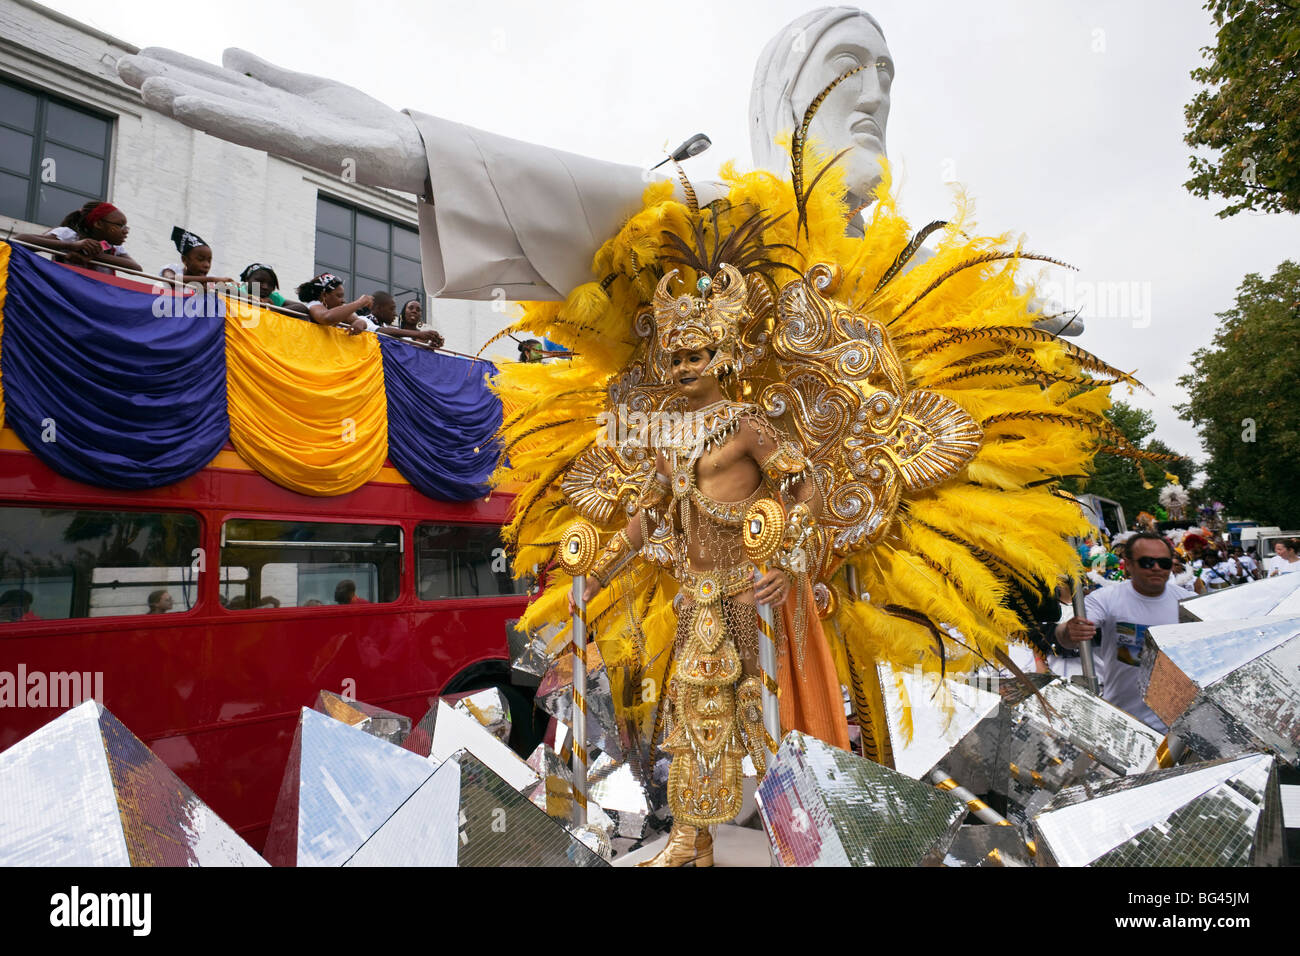 England, London, Notting Hill Carnival, Festival Participant on Float Stock Photo